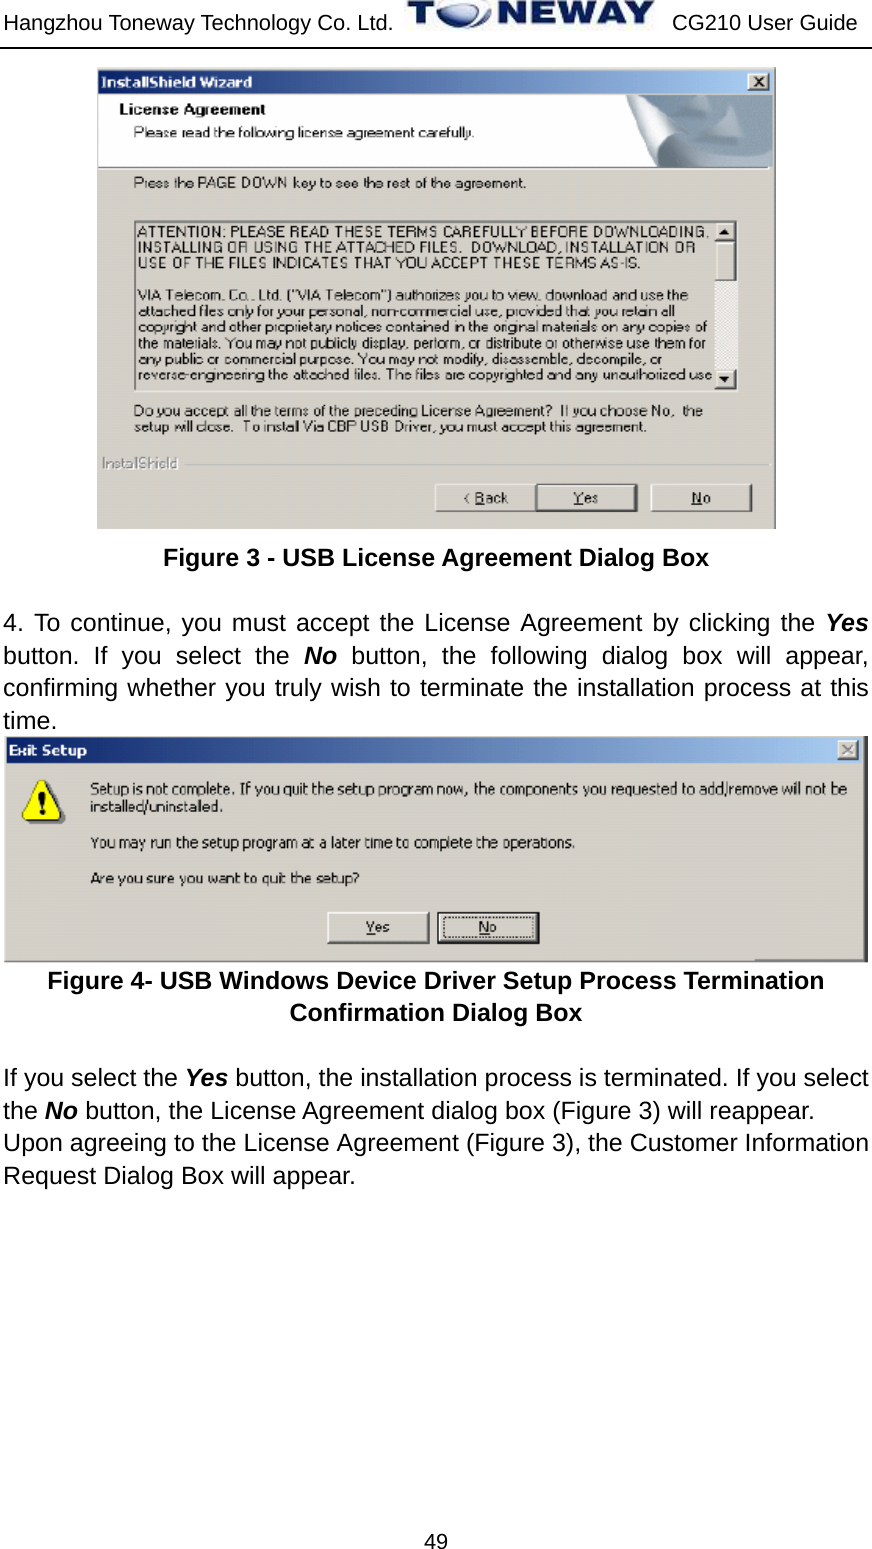 Hangzhou Toneway Technology Co. Ltd.    CG210 User Guide 49  Figure 3 - USB License Agreement Dialog Box  4. To continue, you must accept the License Agreement by clicking the Yes button. If you select the No button, the following dialog box will appear, confirming whether you truly wish to terminate the installation process at this time.  Figure 4- USB Windows Device Driver Setup Process Termination Confirmation Dialog Box  If you select the Yes button, the installation process is terminated. If you select the No button, the License Agreement dialog box (Figure 3) will reappear. Upon agreeing to the License Agreement (Figure 3), the Customer Information Request Dialog Box will appear. 